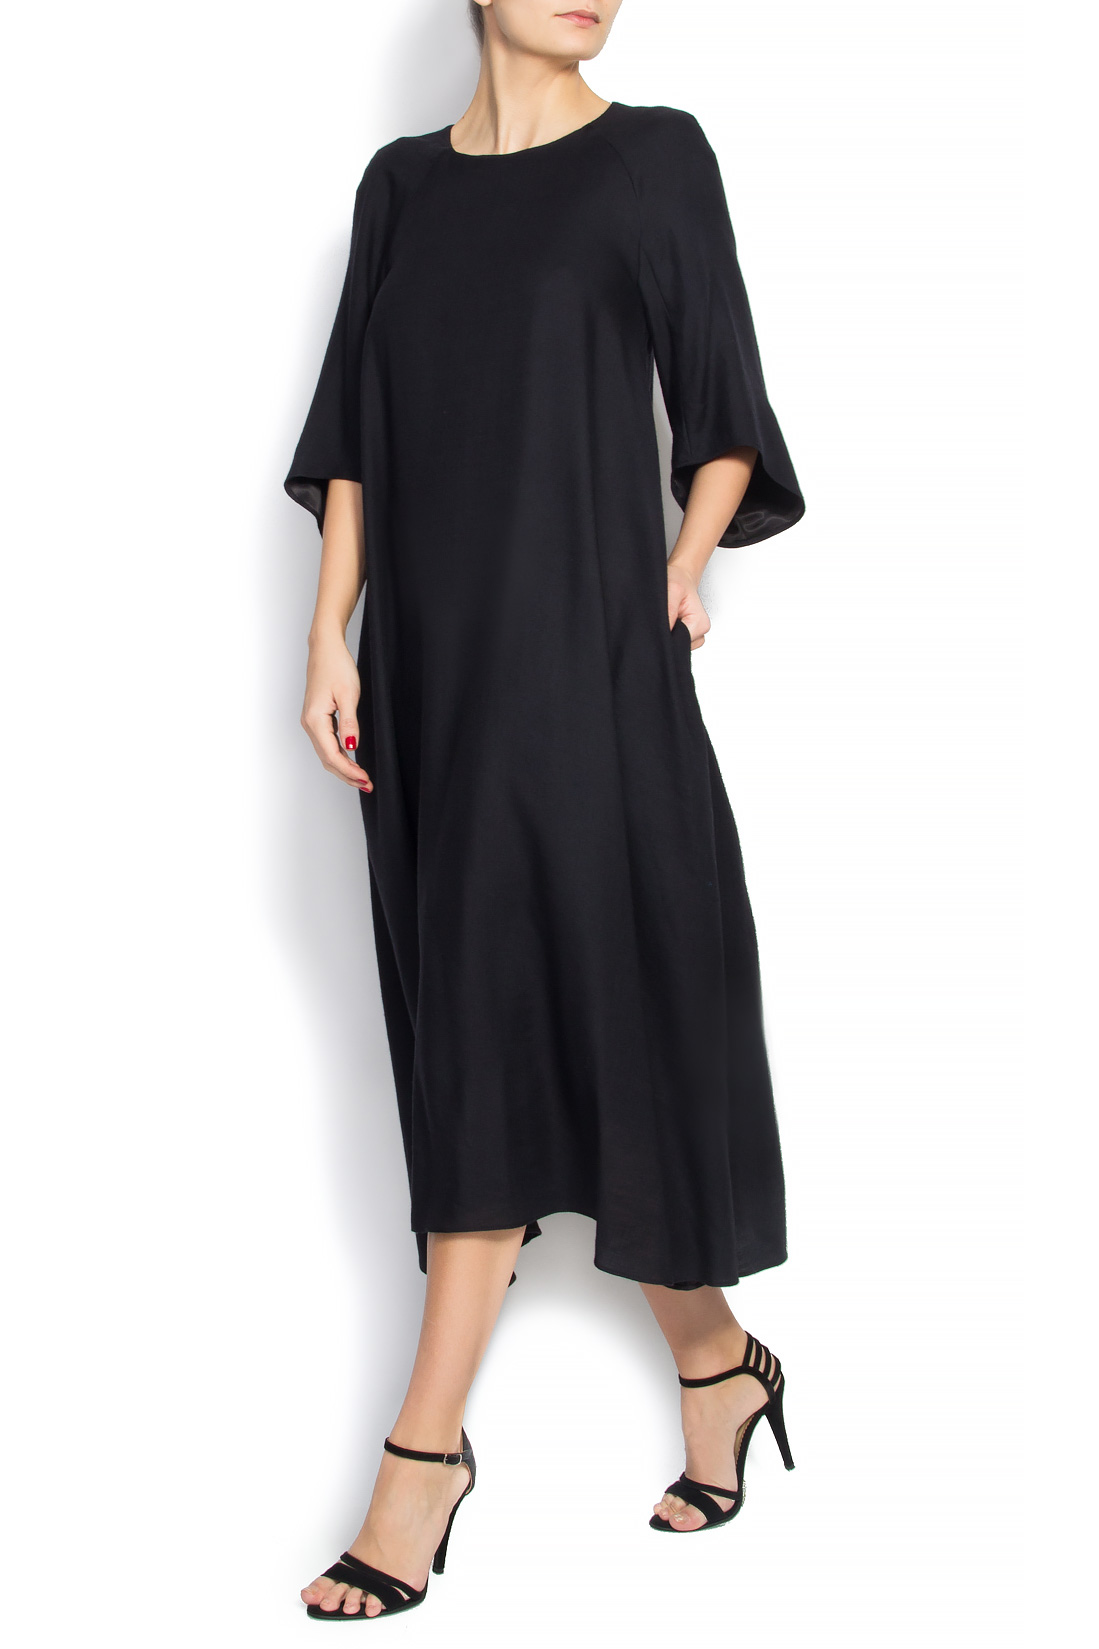 Visionary belted wool midi dress Aer Wear image 0